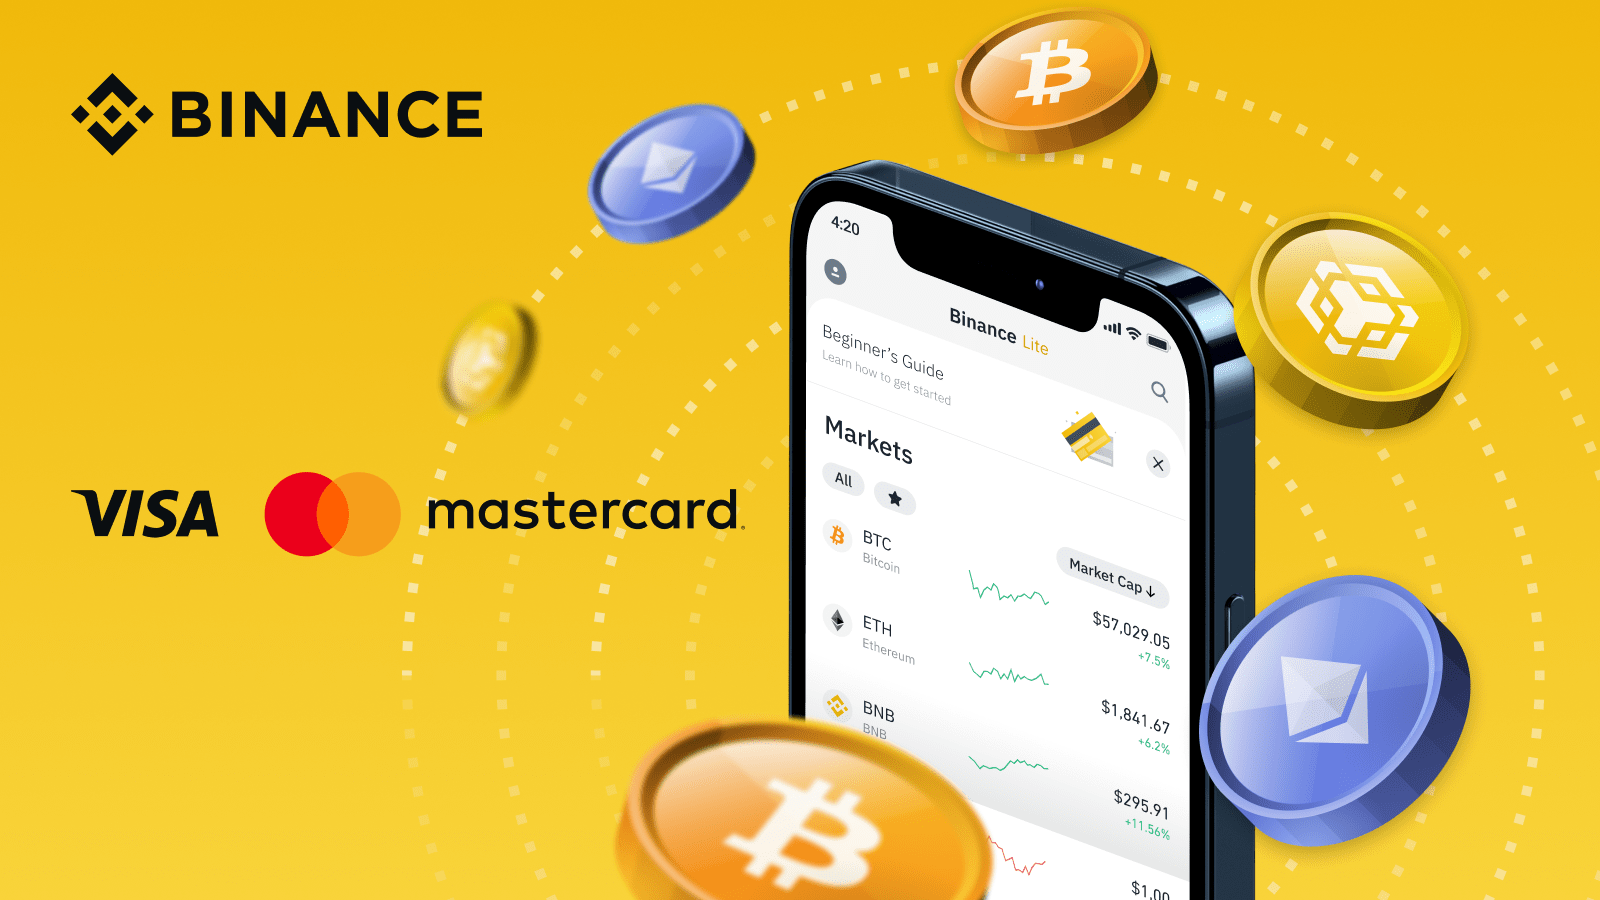 Binance Card Review - It Is SAFE BUT Is It The Right Choice For You?